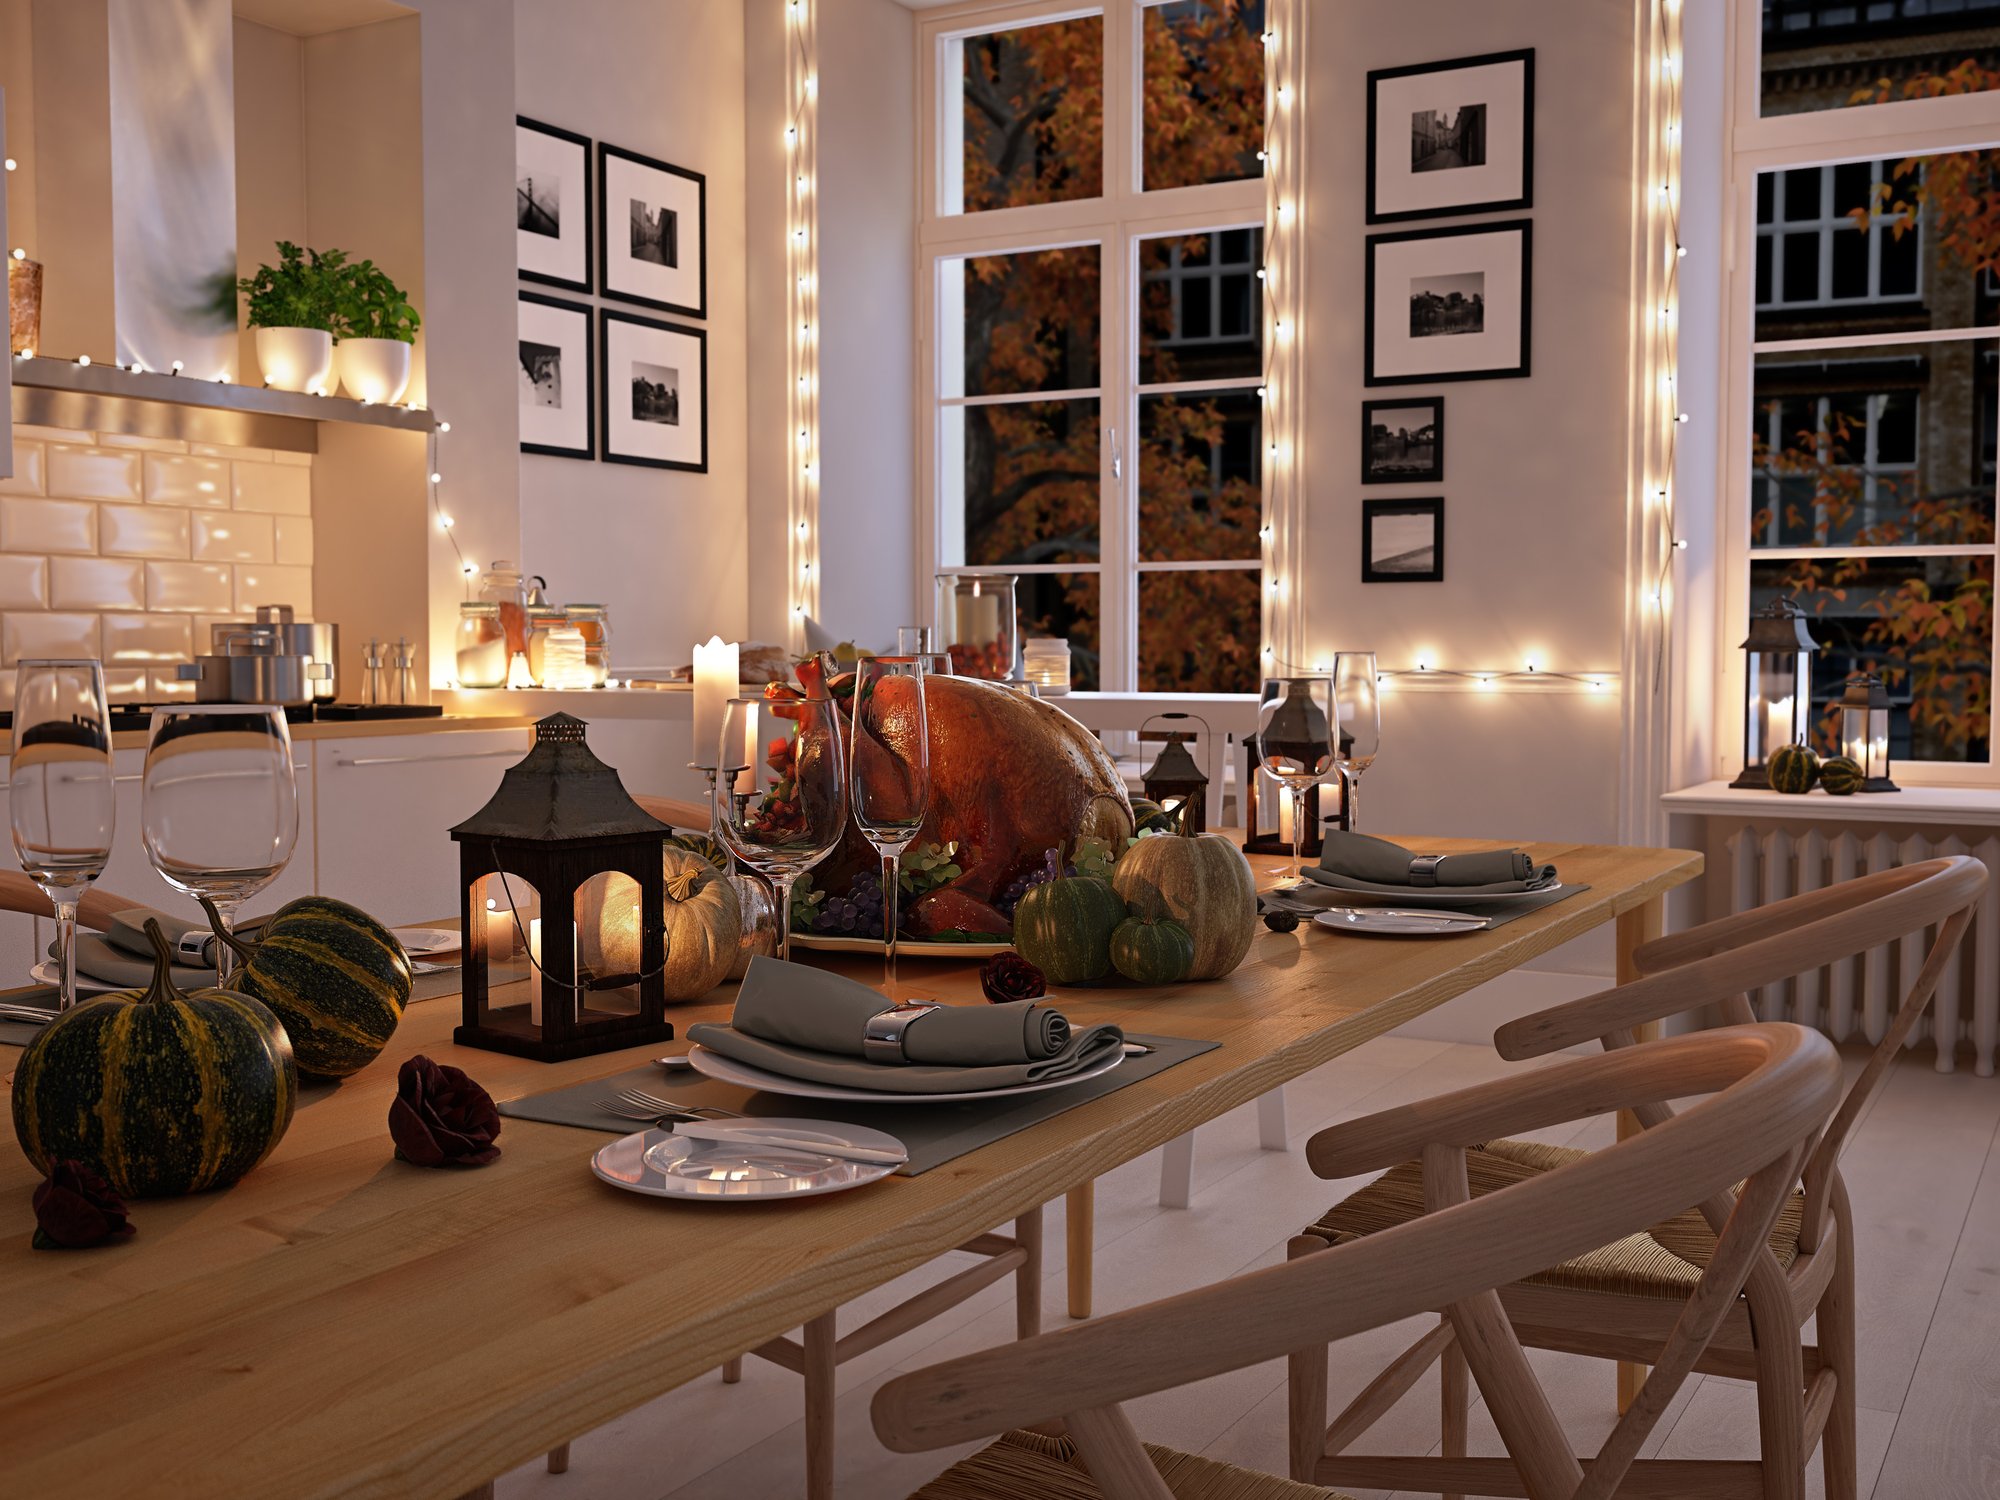 Easy Thanksgiving Decor Ideas That Will Amaze your Guests